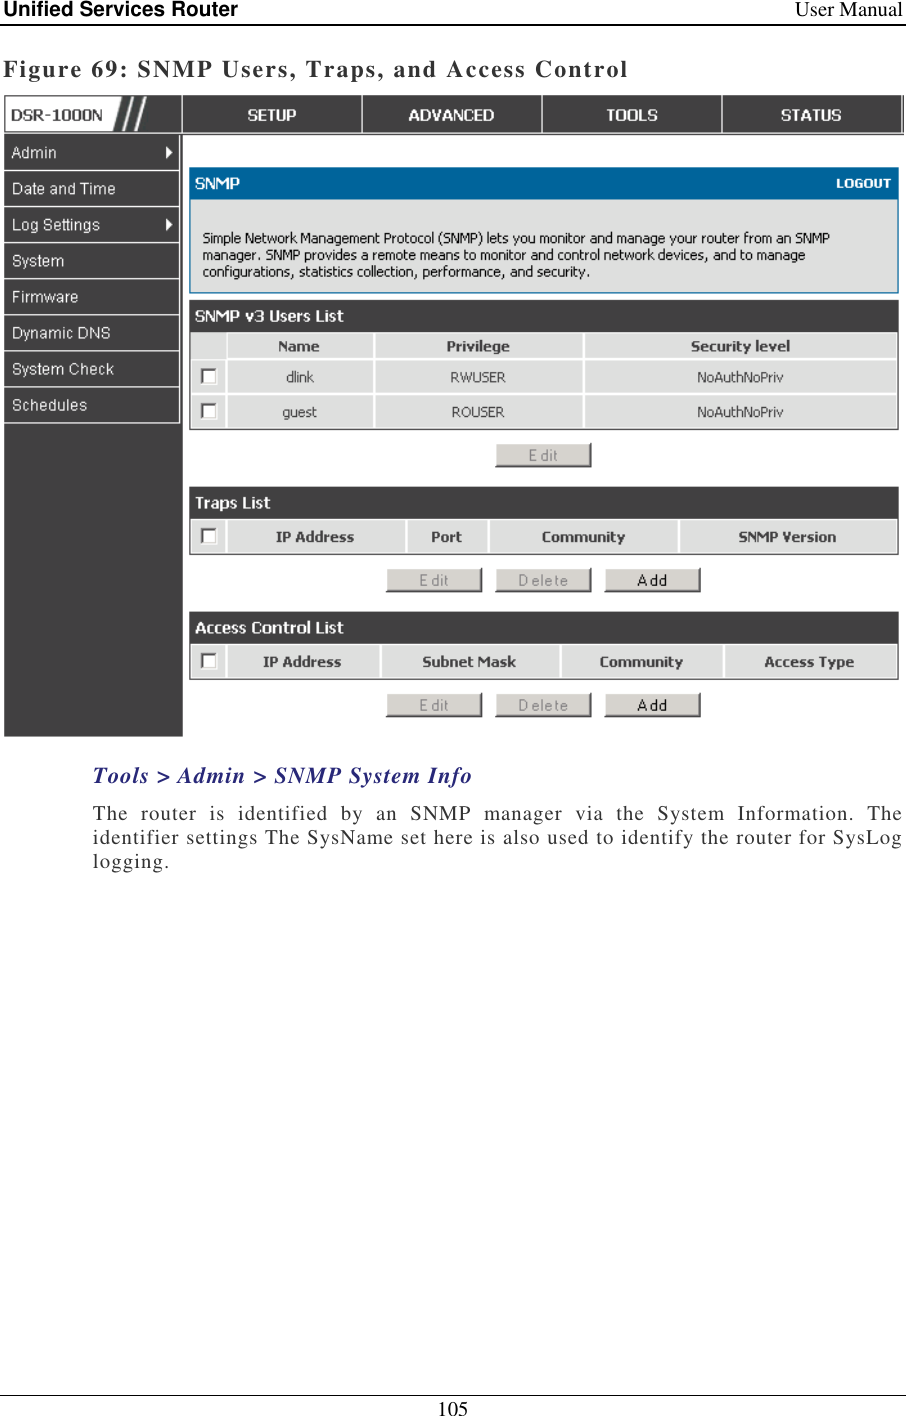 Unified Services Router    User Manual 105  Figure 69: SNMP Users, Traps, and Access Control  Tools &gt; Admin &gt; SNMP System Info The  router  is  identified  by  an  SNMP  manager  via  the  System  Information.  The identifier settings The SysName set here is also used to identify the router for SysLog logging.  